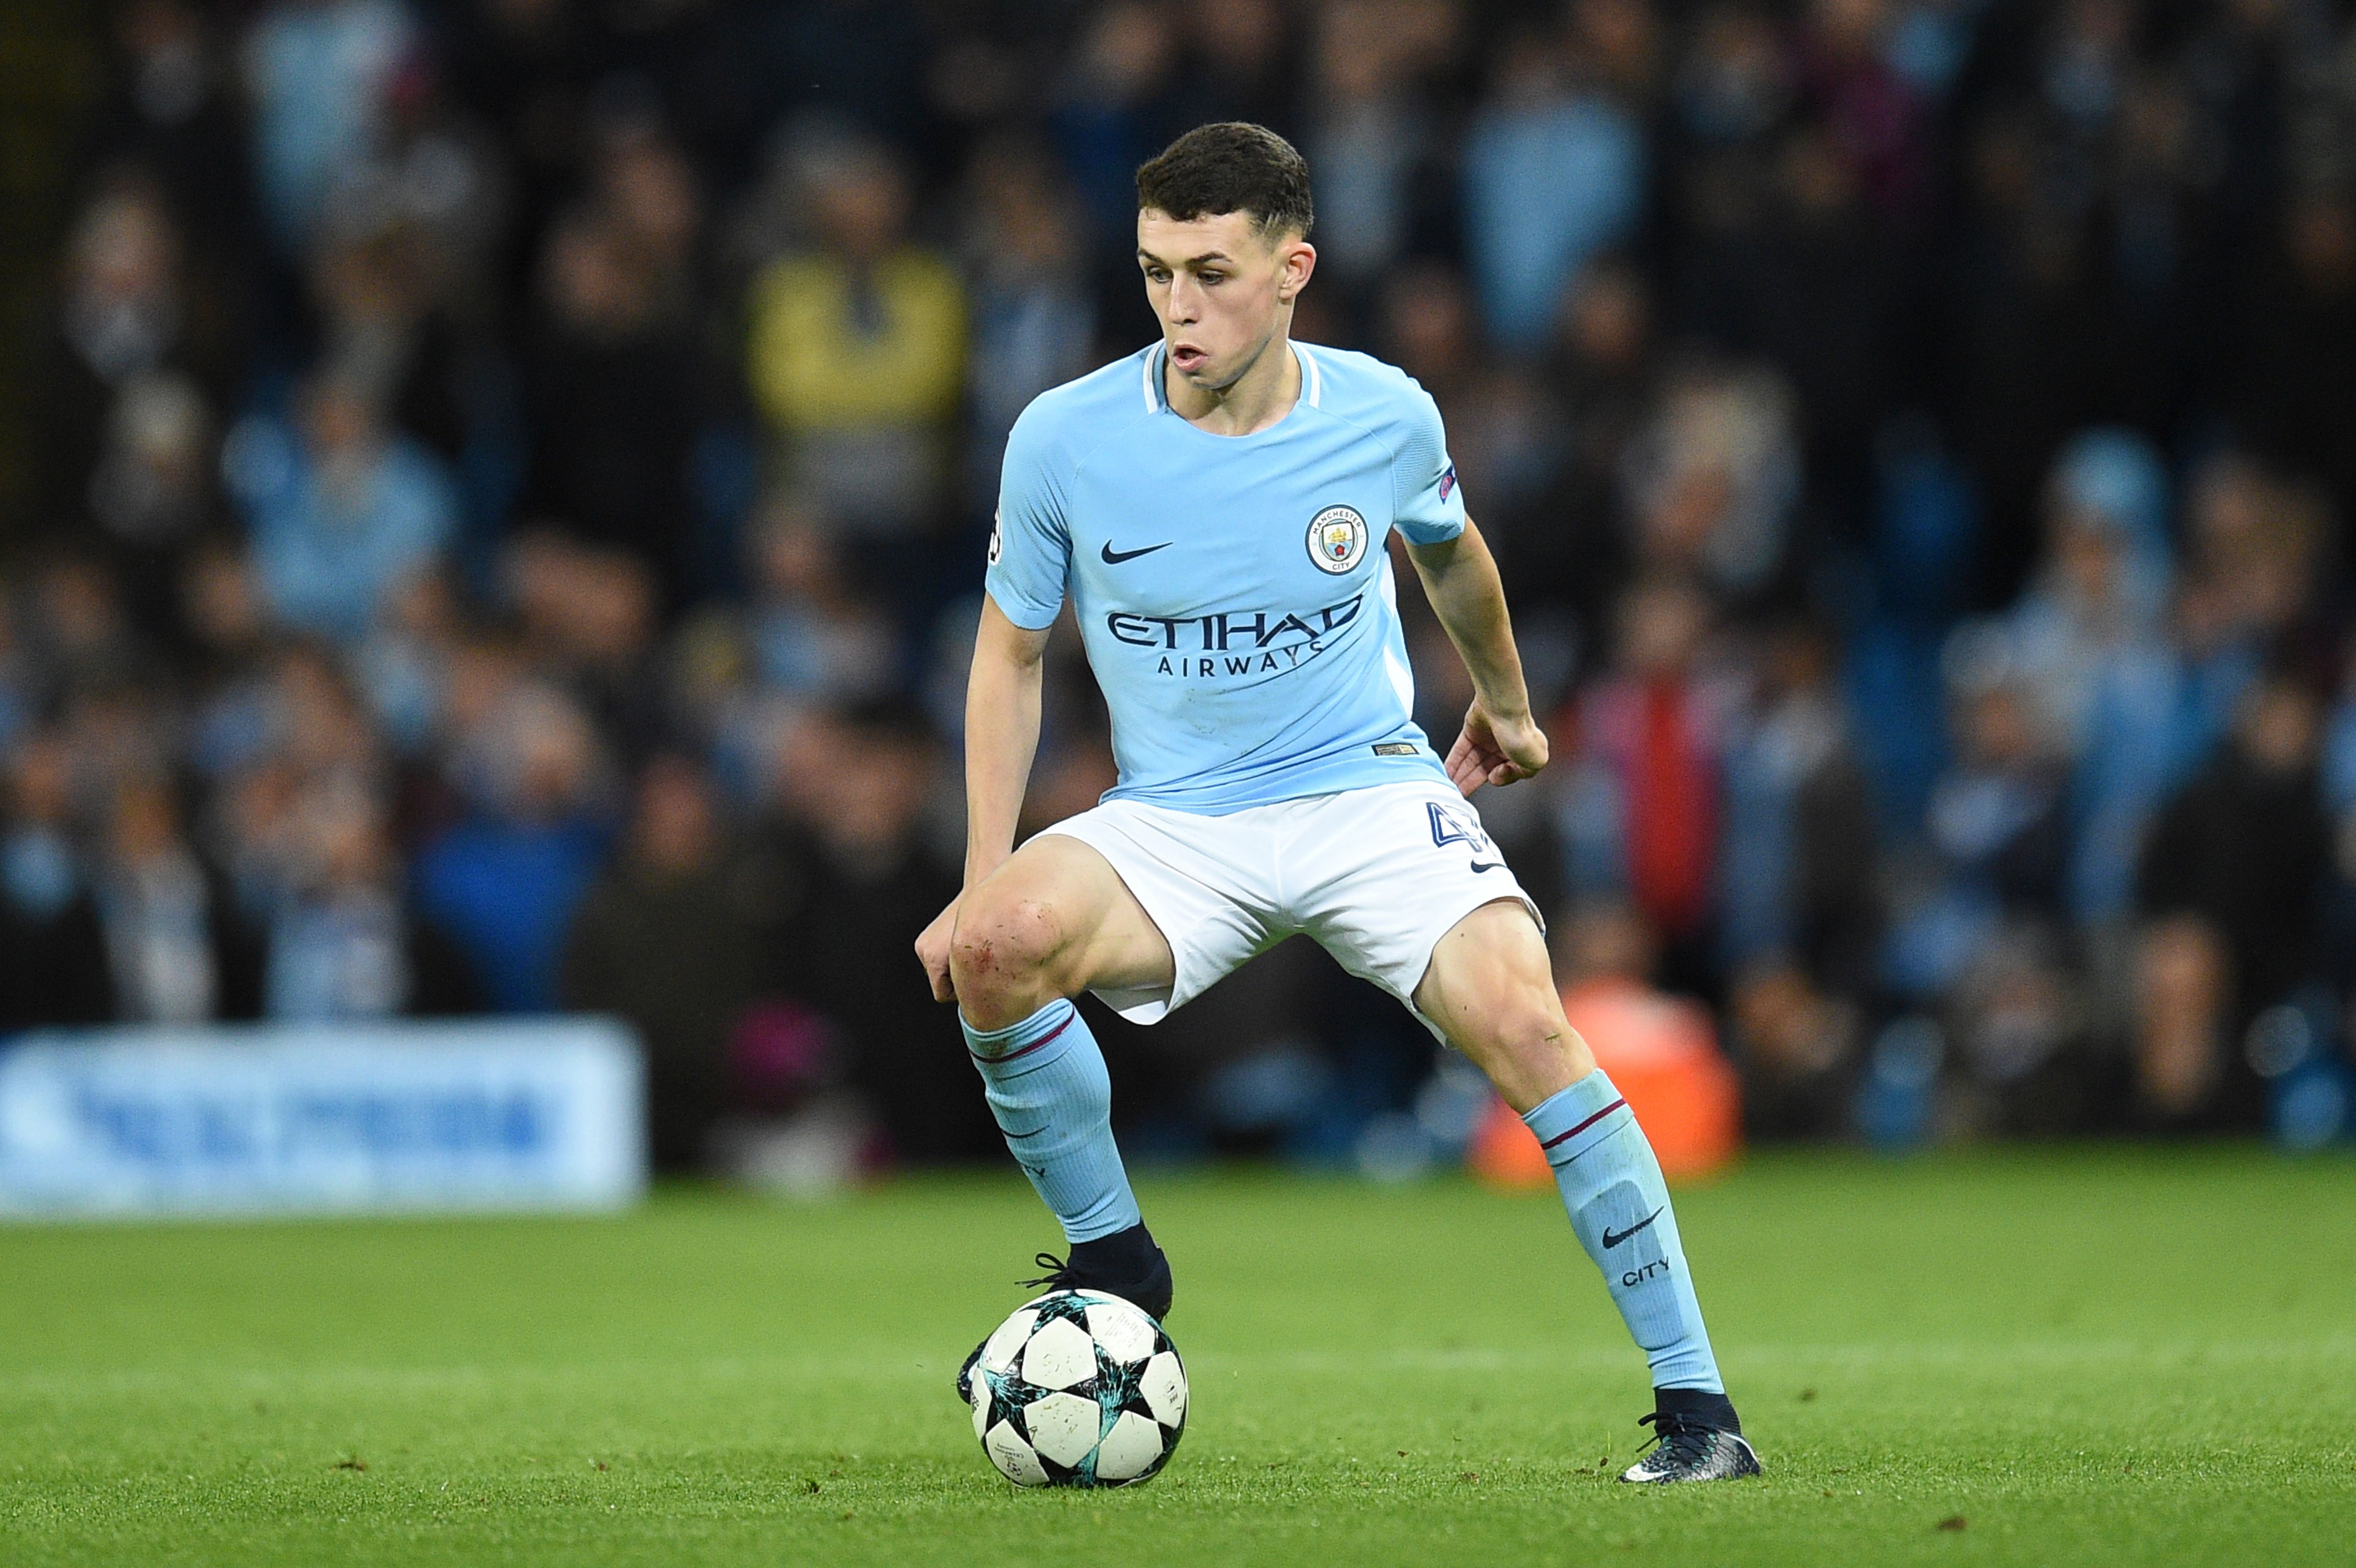 Manchester City's English midfielder Phil Foden controls the ball during the UEFA Champions League Group F football match between Manchester City and Feyenoord at the Etihad Stadium in Manchester, north west England, on November 21, 2017. / AFP PHOTO / Oli SCARFF        (Photo credit should read OLI SCARFF/AFP/Getty Images)